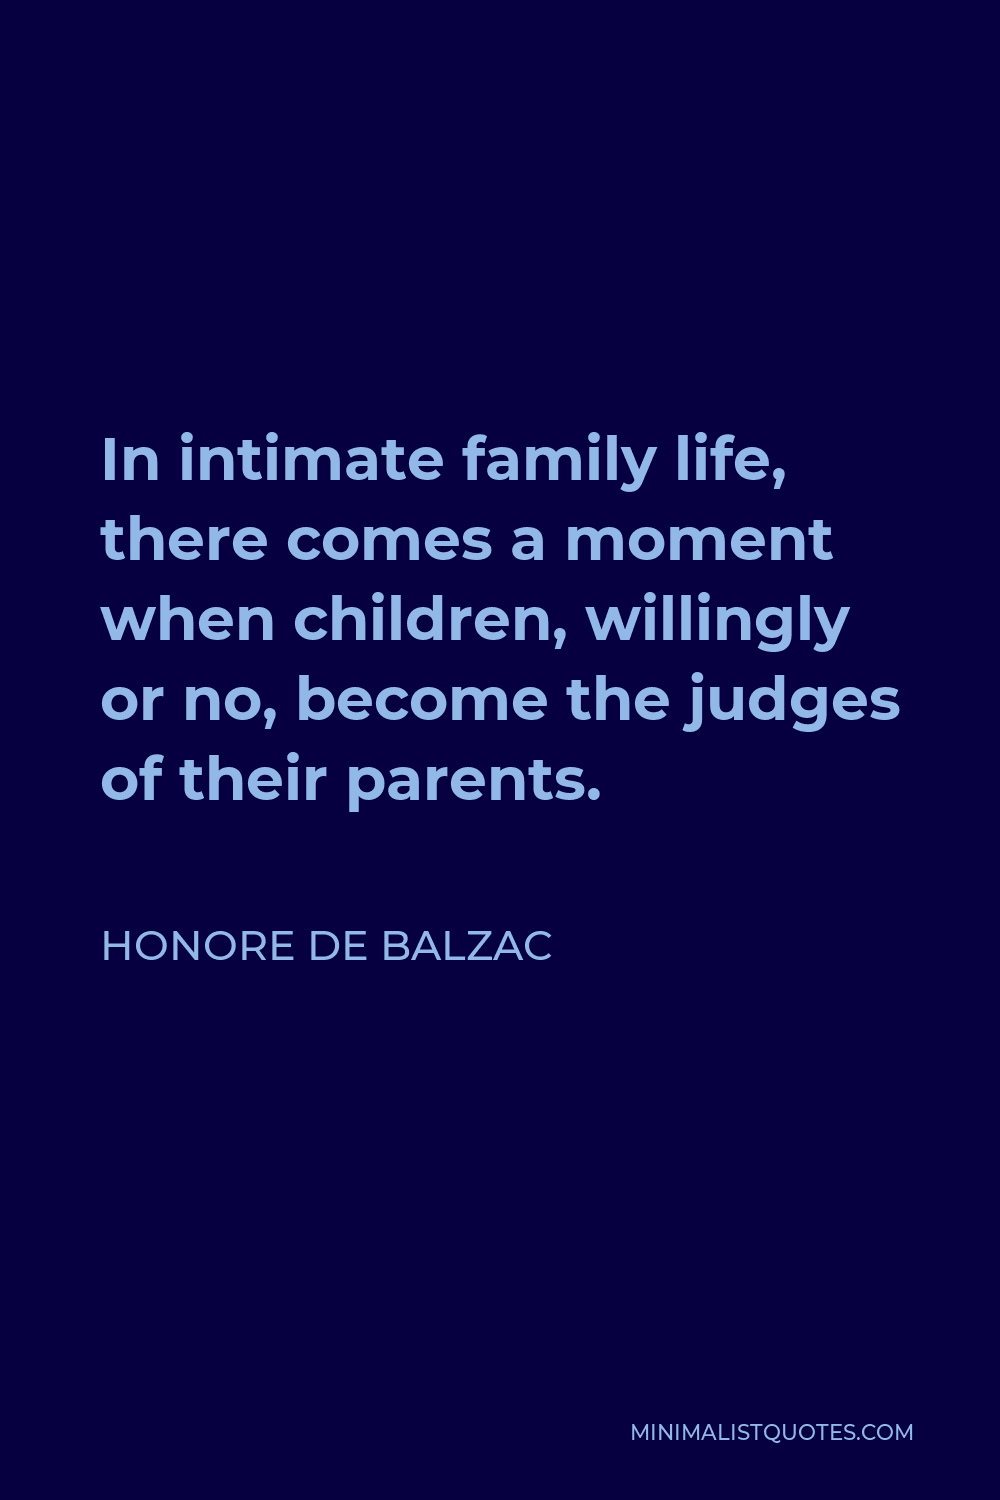 Honore de Balzac Quote - In intimate family life, there comes a moment when children, willingly or no, become the judges of their parents.